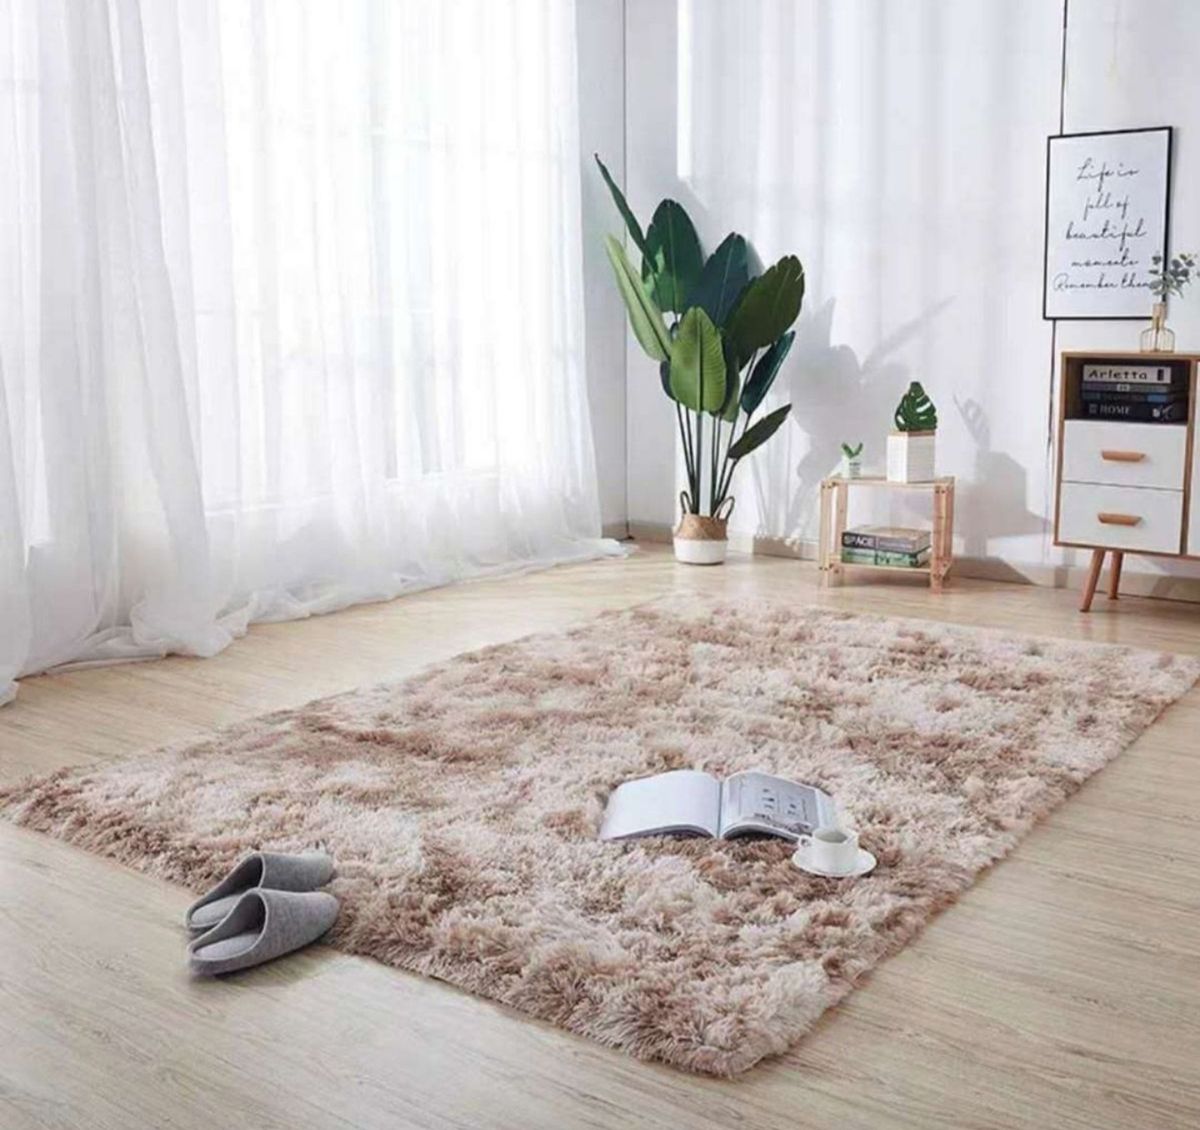 Large Premium Quality Fluffy Carpet/Rug | Shop Today. Get it Tomorrow ...